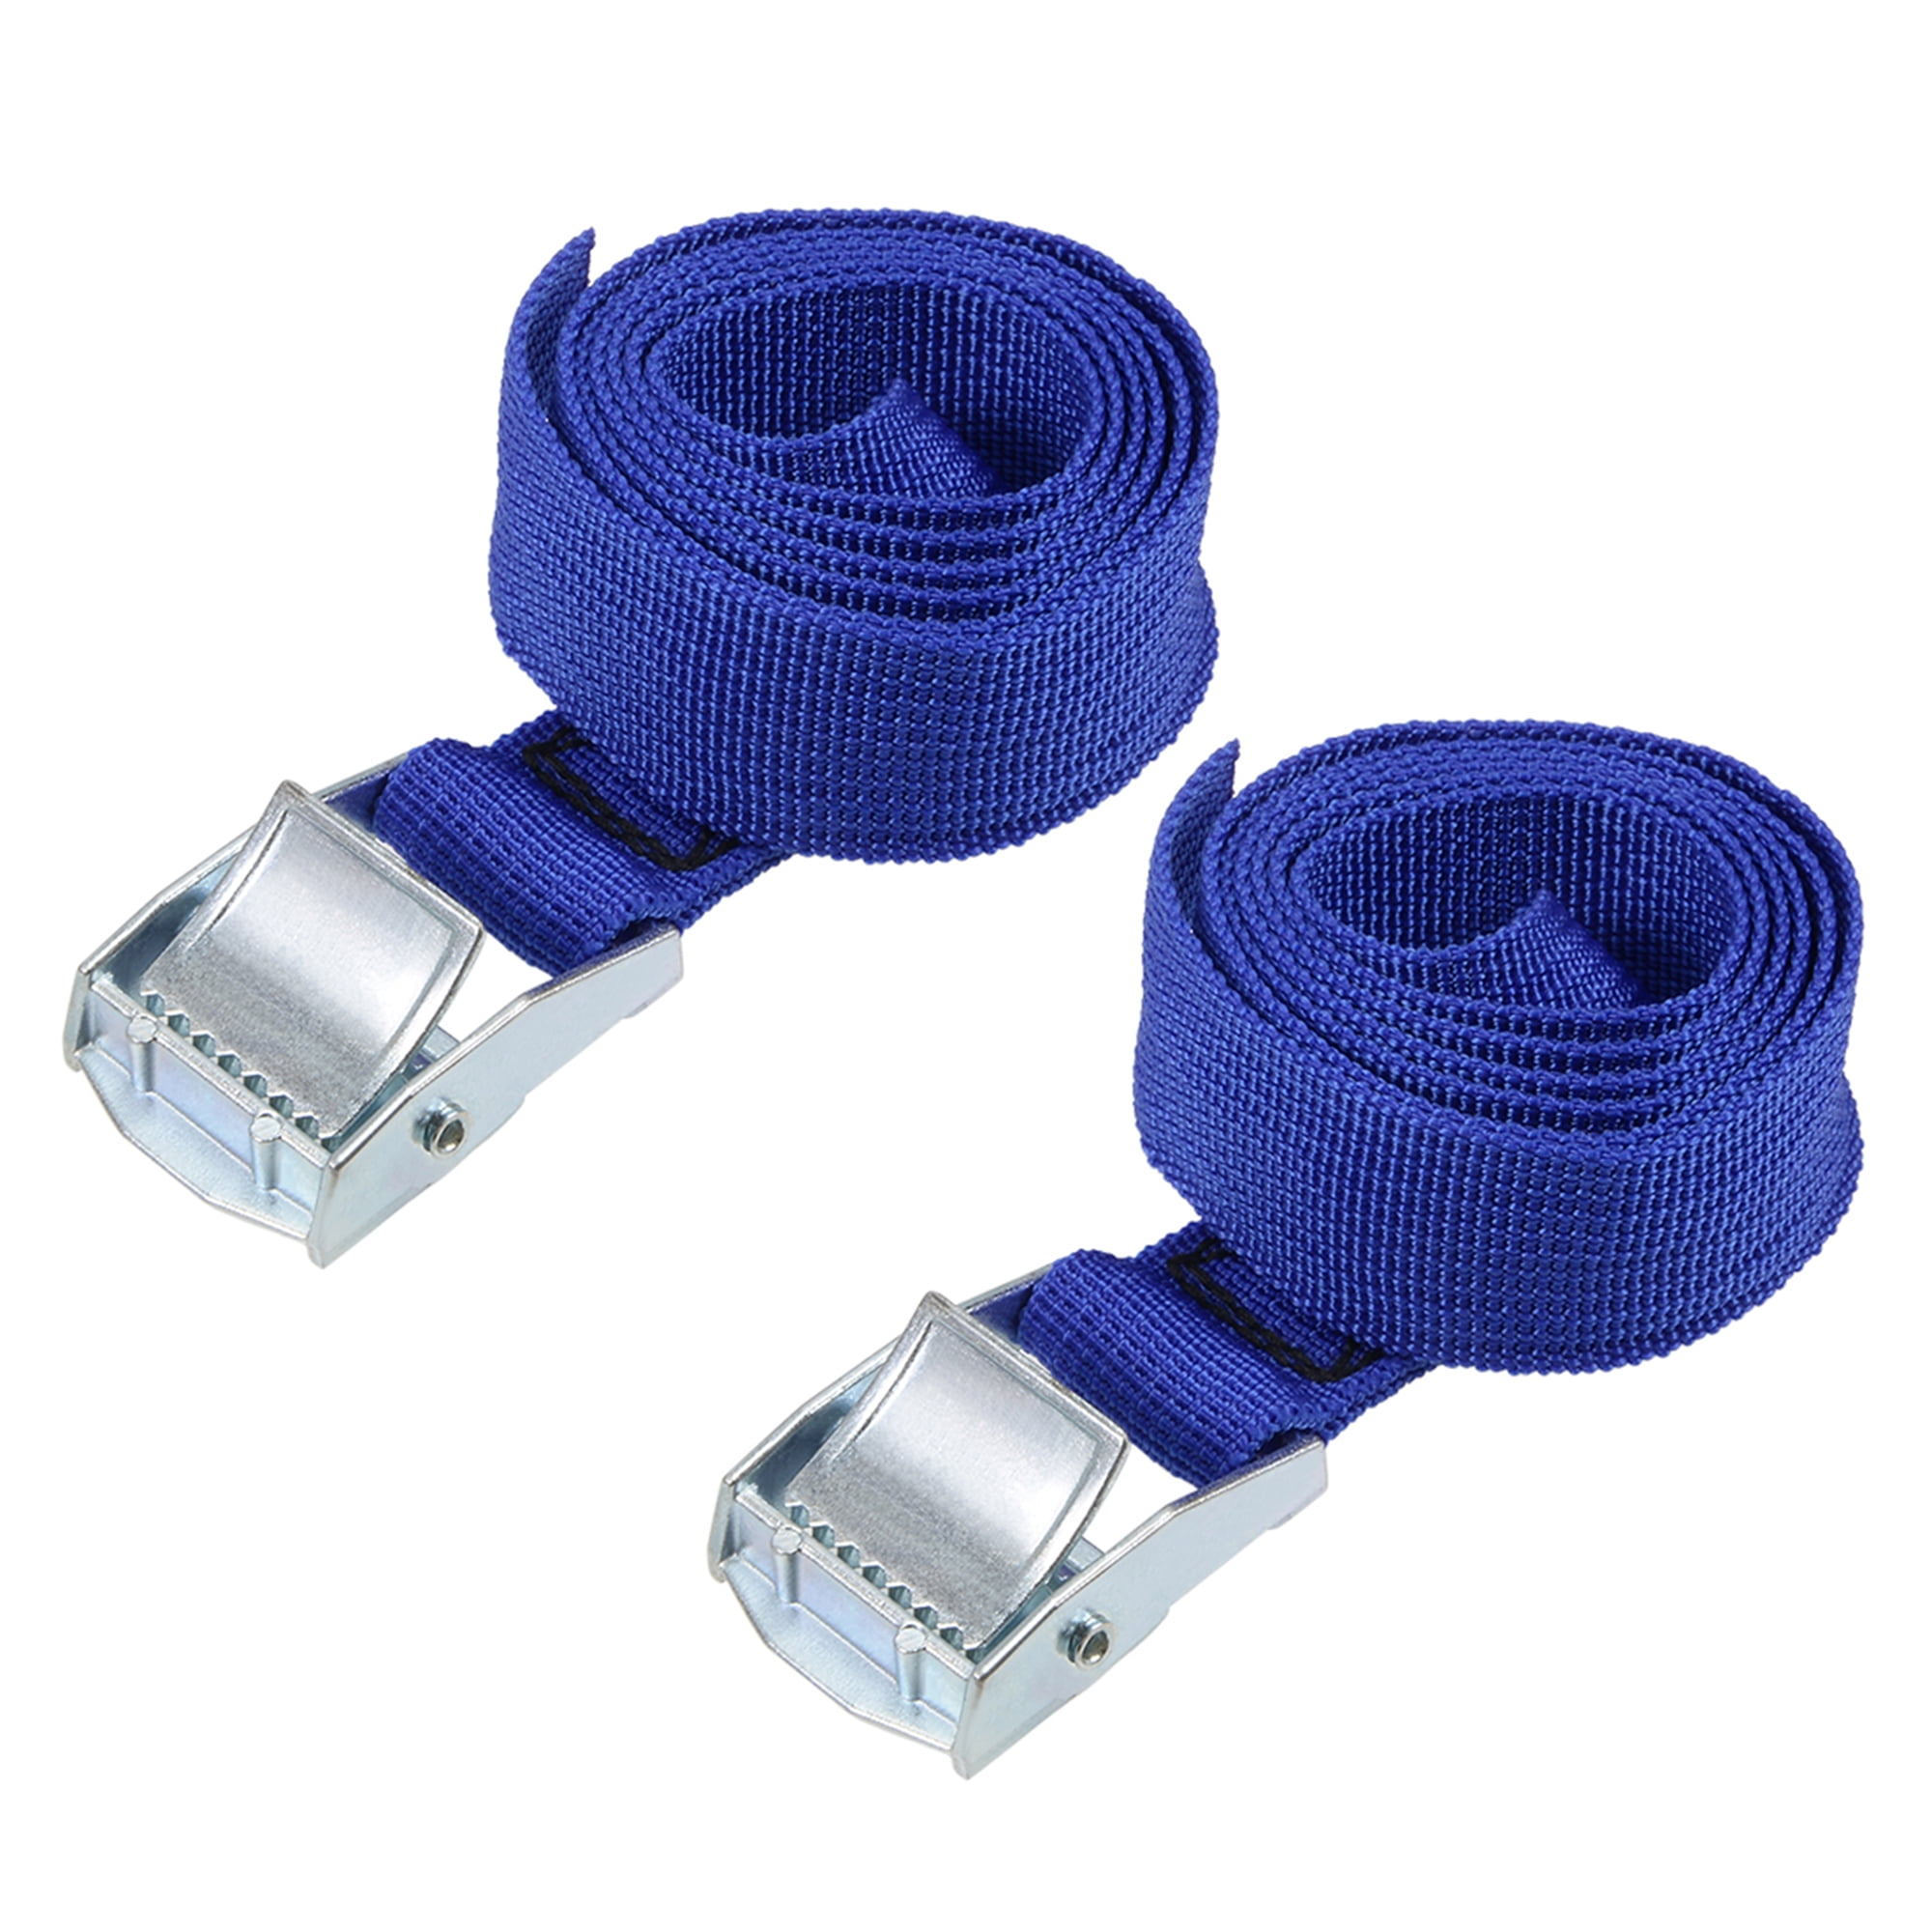 Uxcell 1M x 25mm Lashing Strap with Cam Buckle 250Kg Work Load, Blue, 2 ...